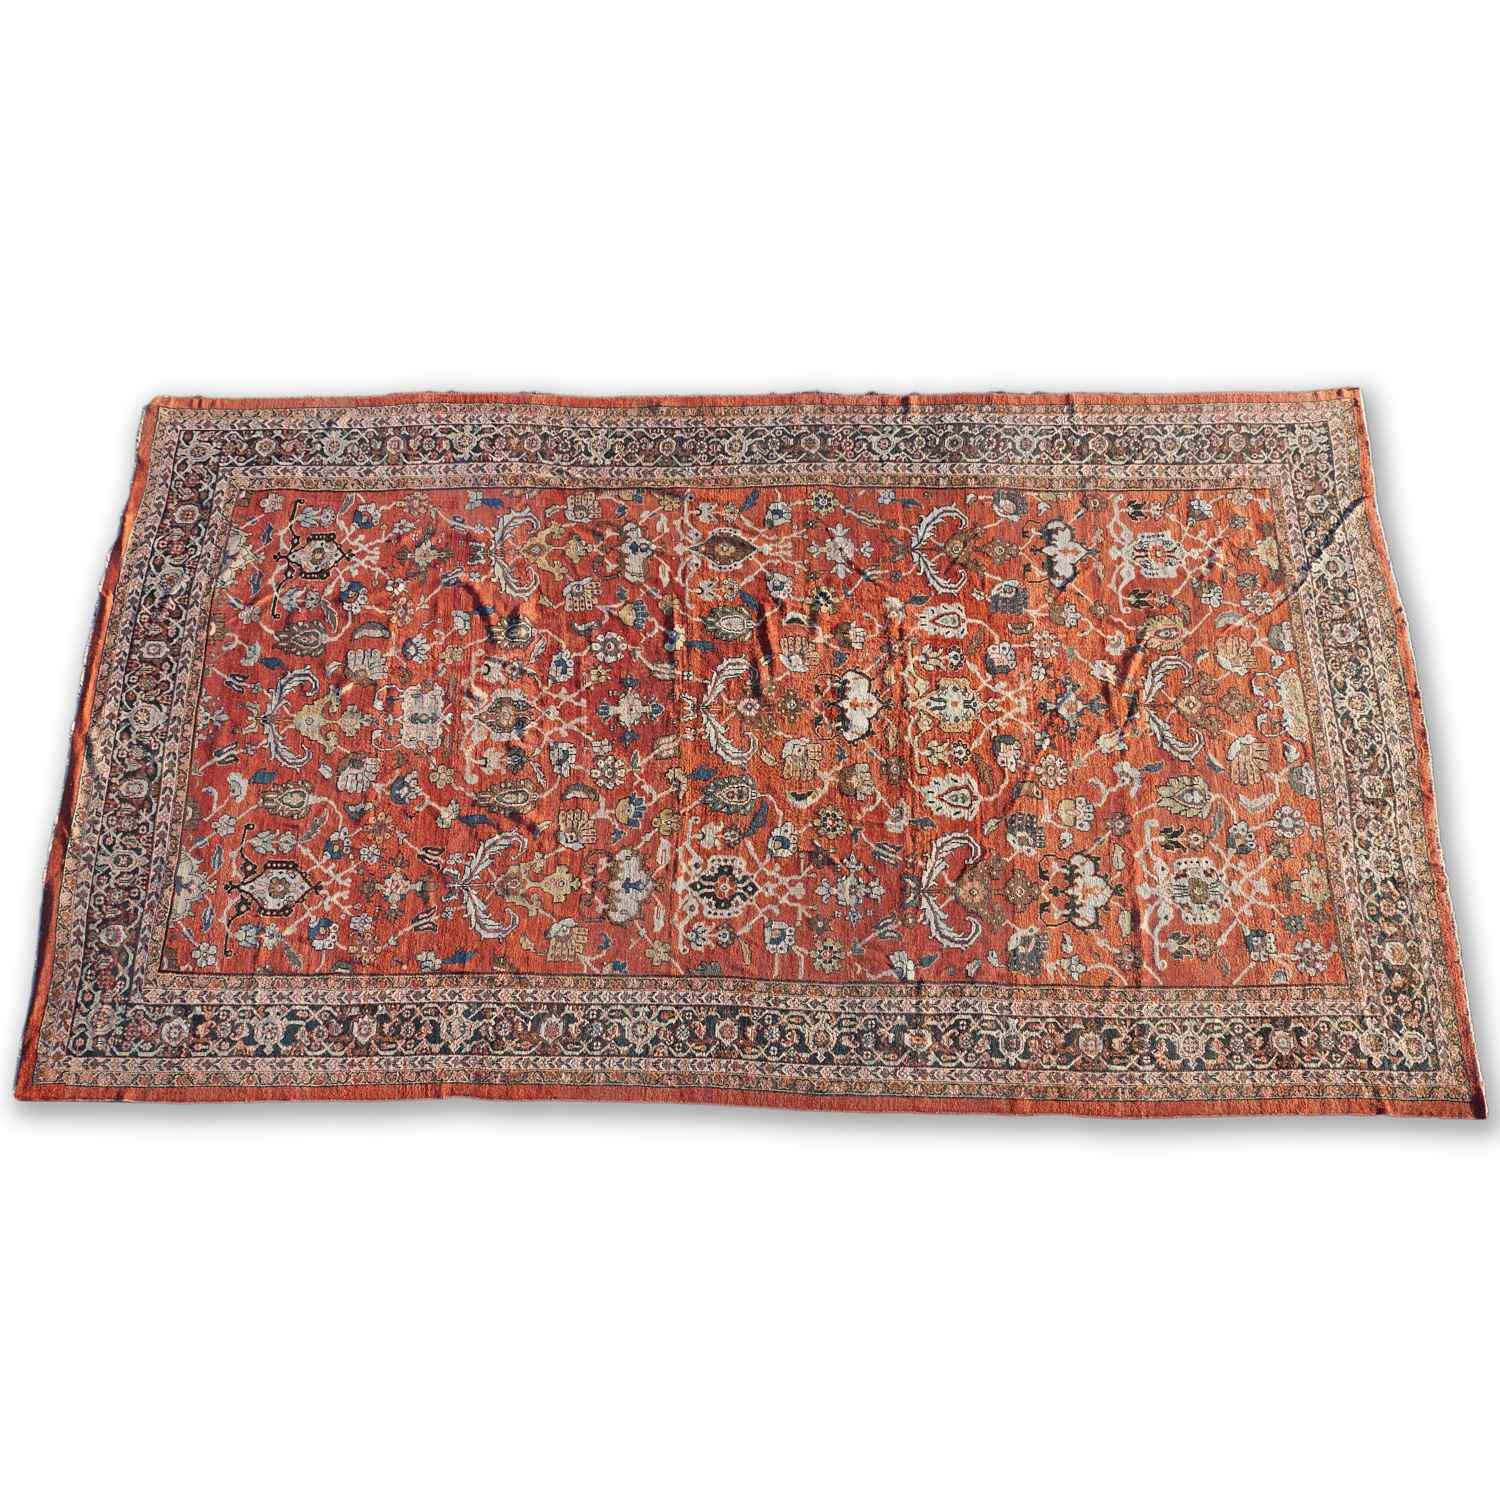 ROOM SIZE PERSIAN CARPET first 2ce36a